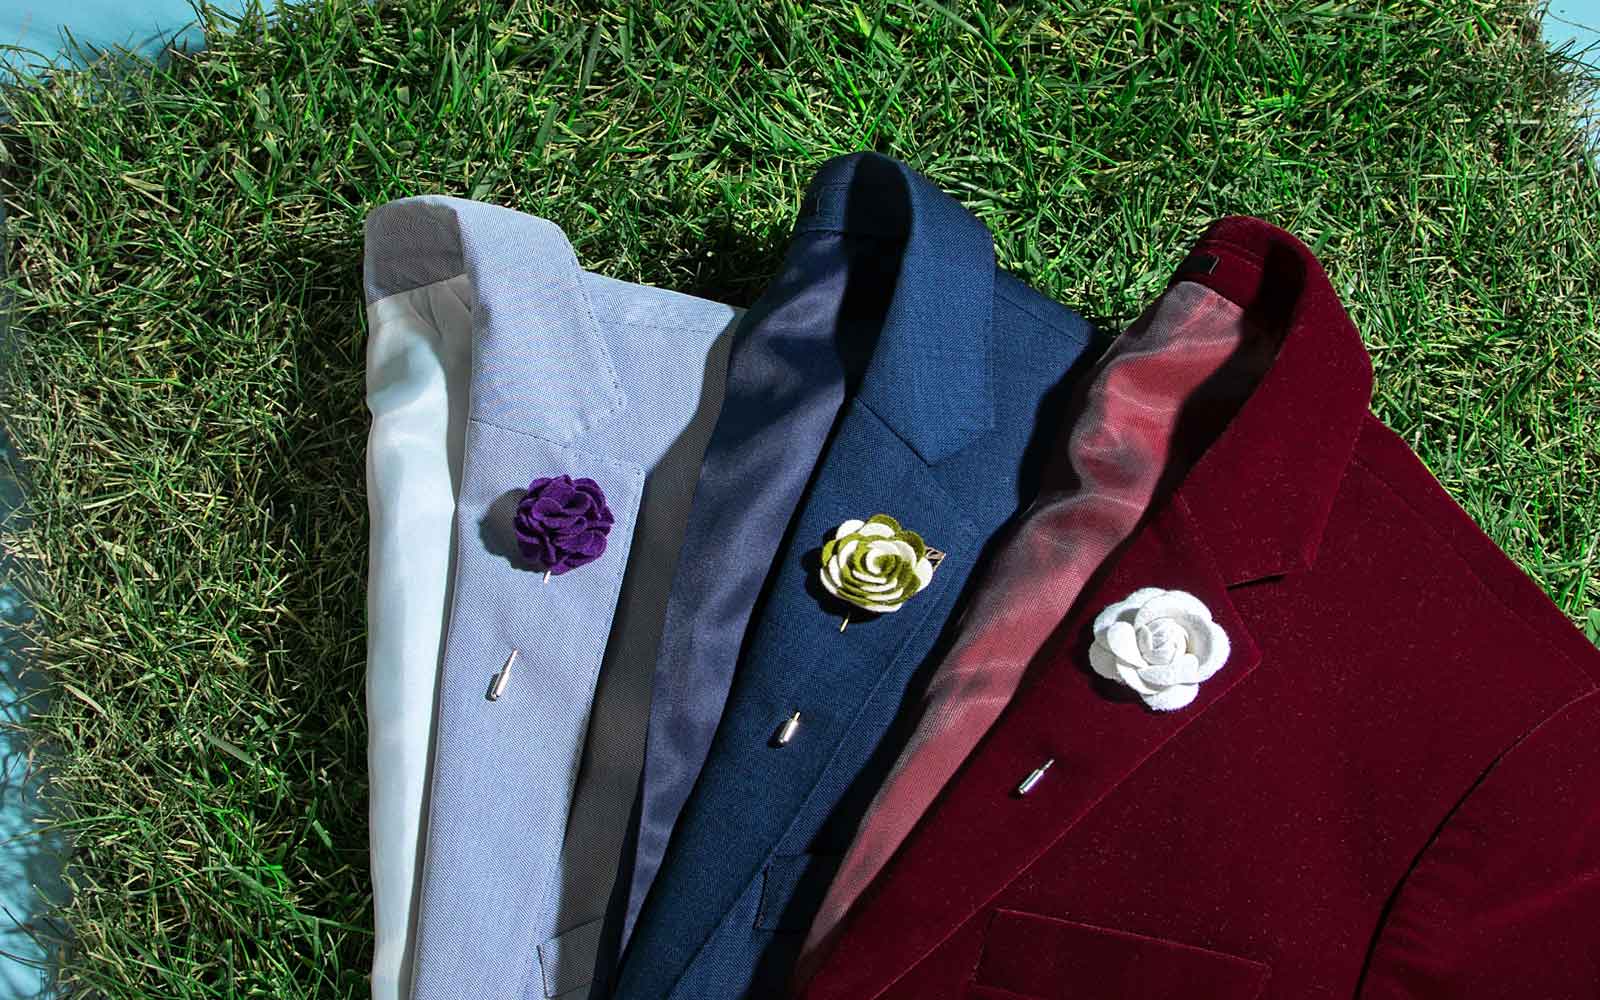 8 Lapel Pins & Brooches to Dress up your Jacket